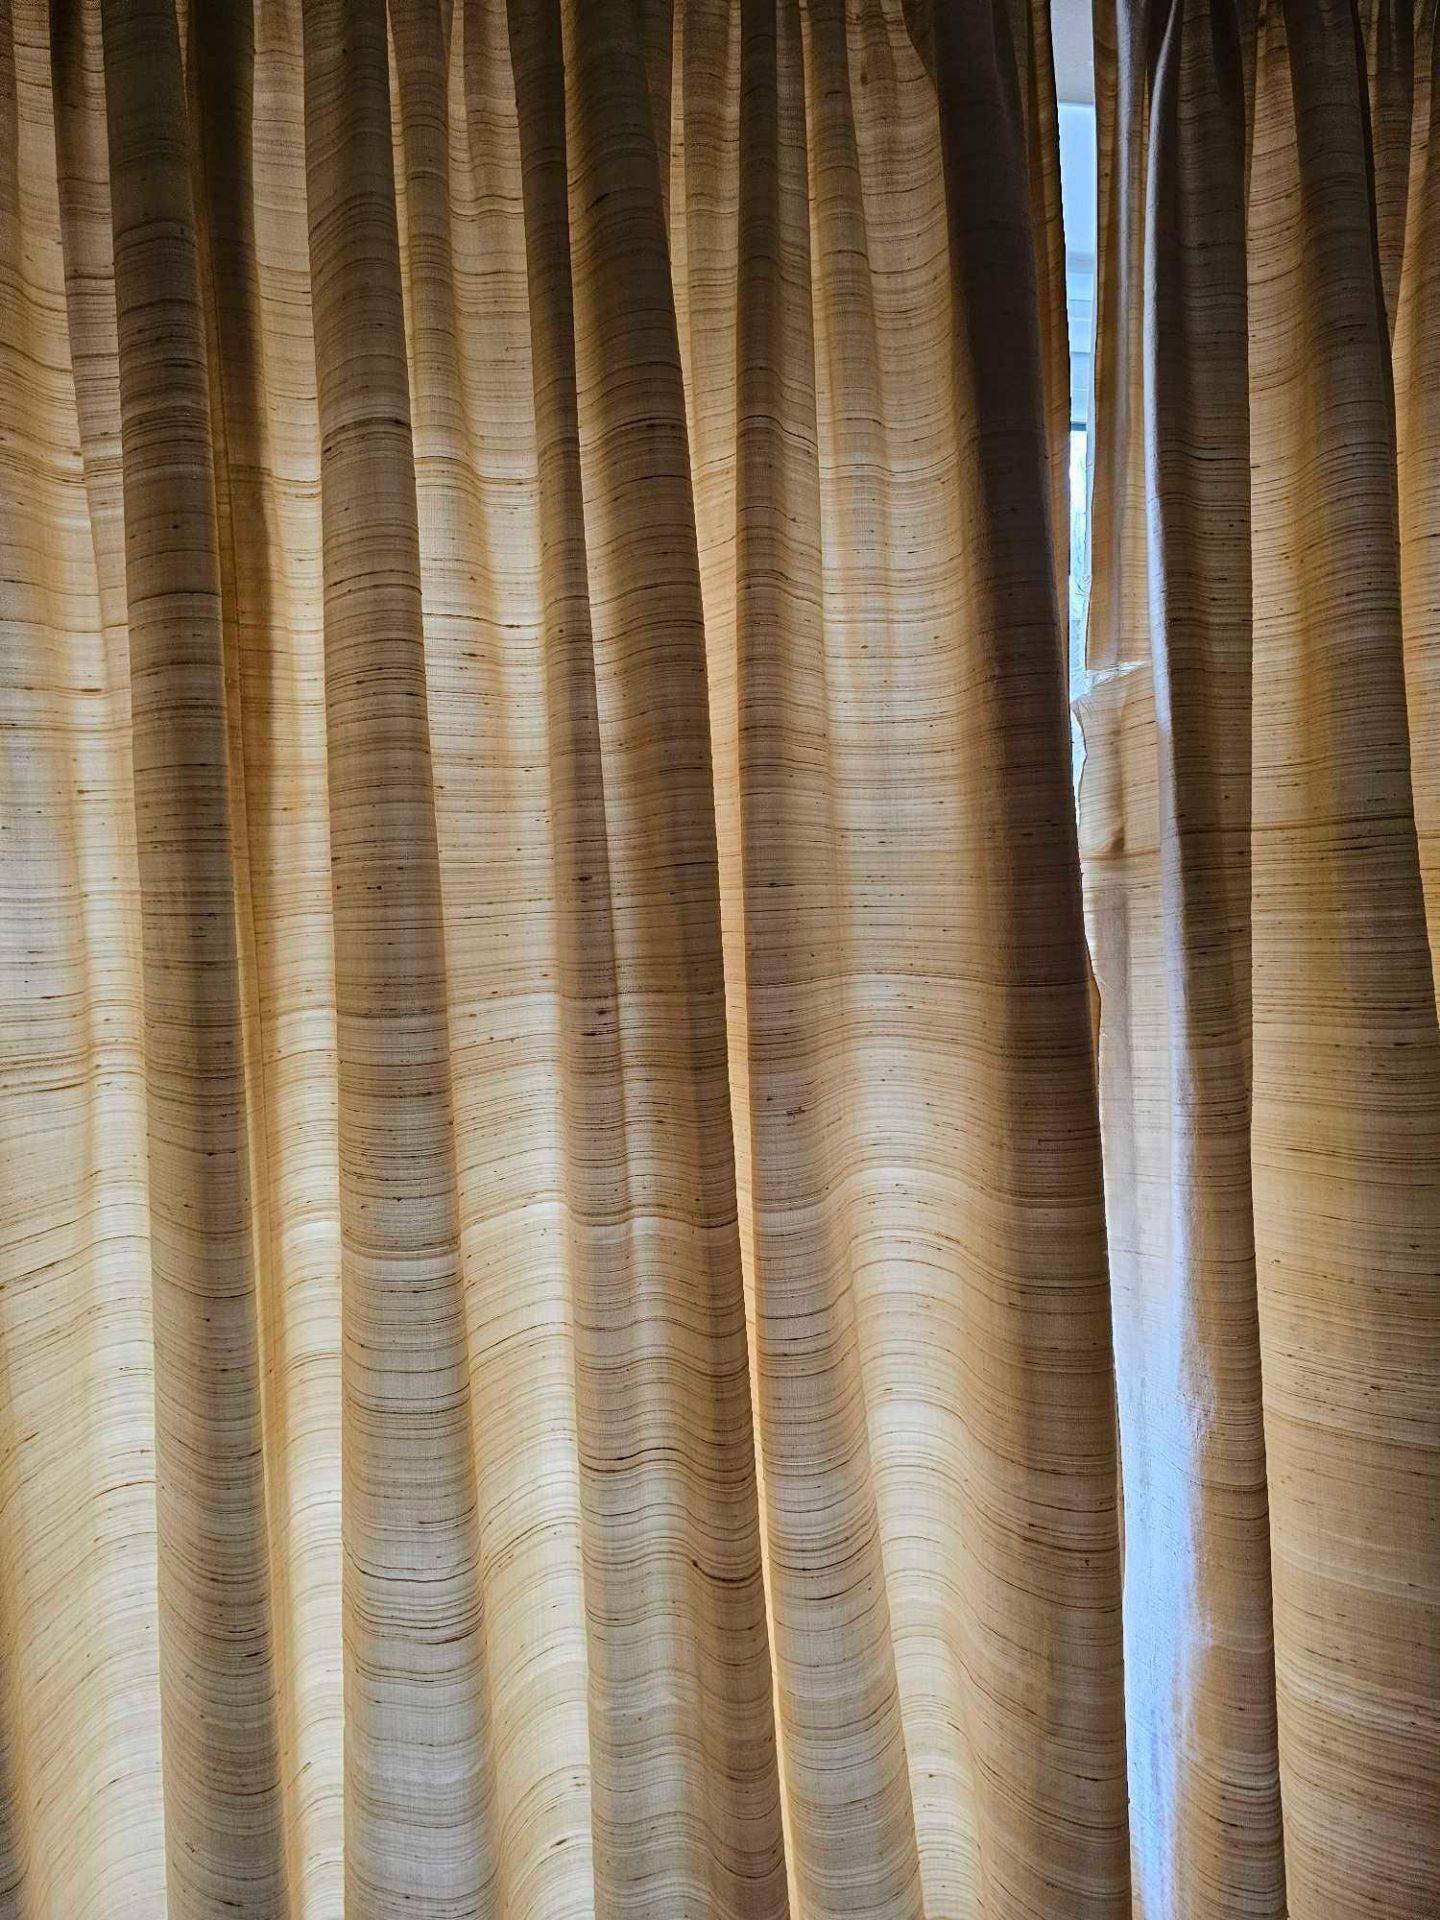 A Pair Of Curtains Gold Sheen 260 X 160cm Span (A/F) - Image 2 of 3